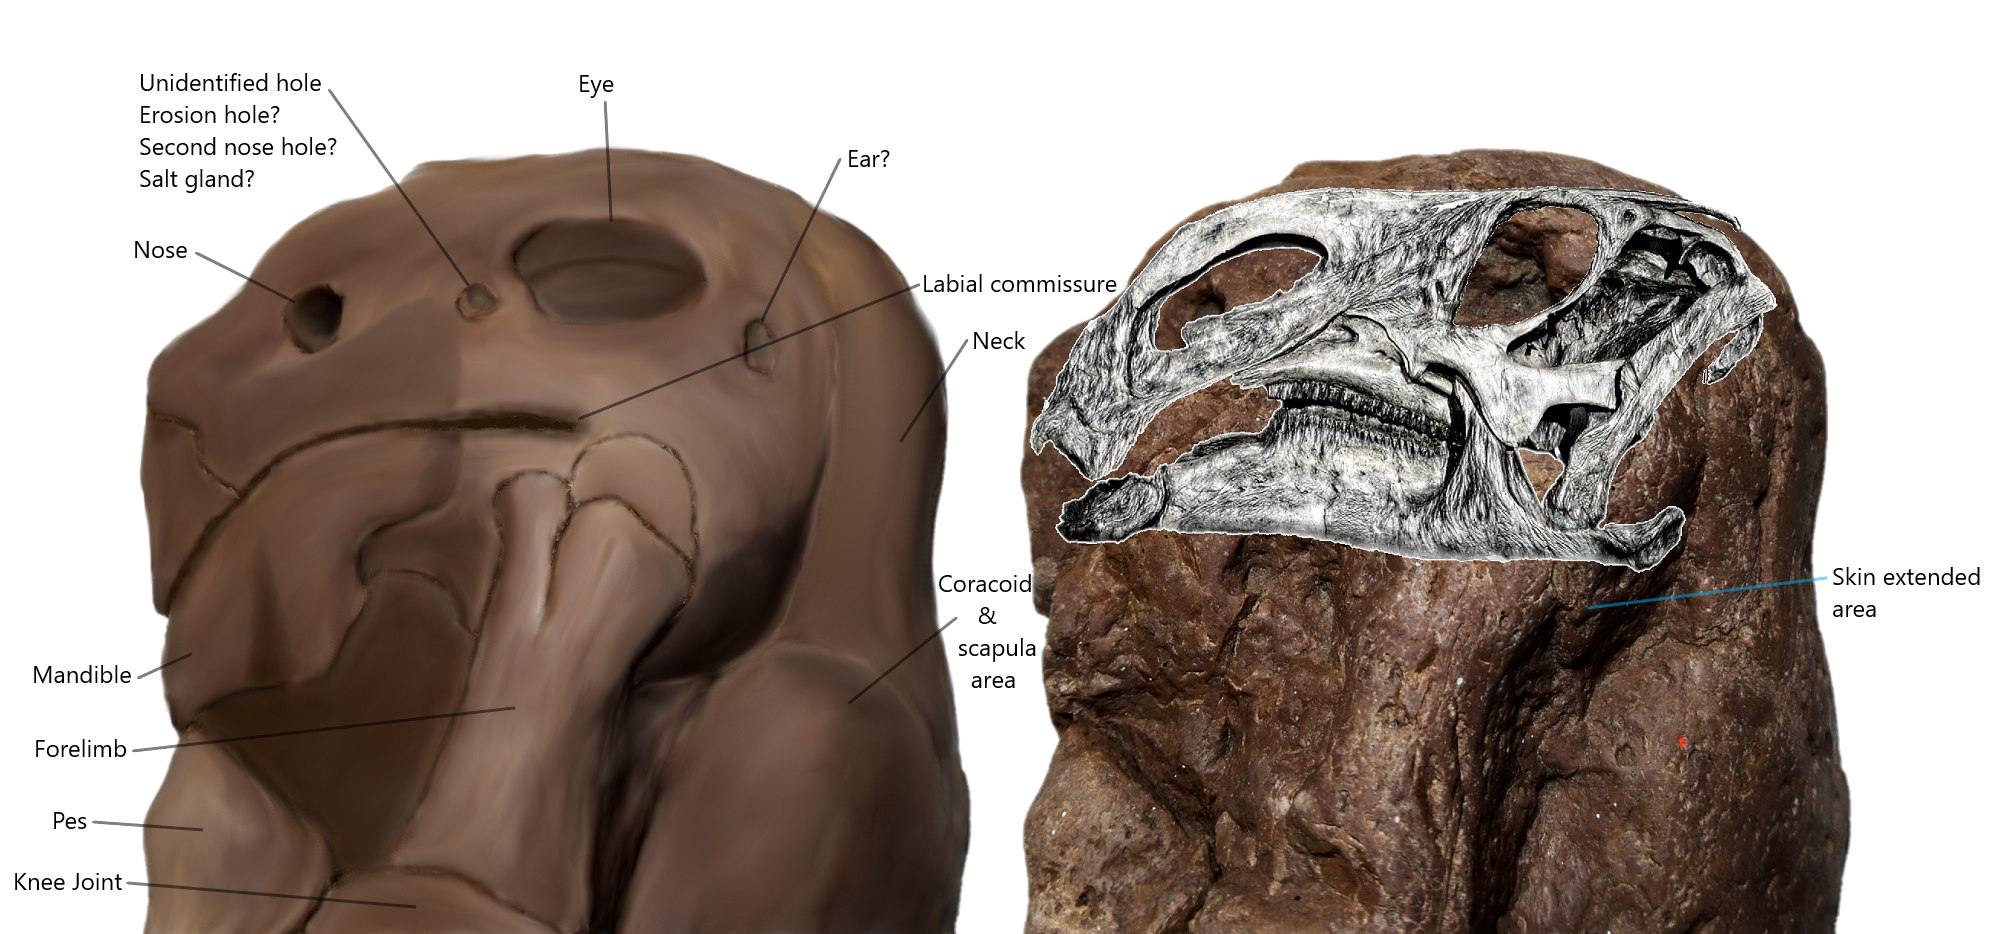 Figure 9. Superimpose Test (in lateral view, left side) of restoration image with drawing of Brachylophosaurus canadensis skull [2] from Royal Tyrrell Museum. 